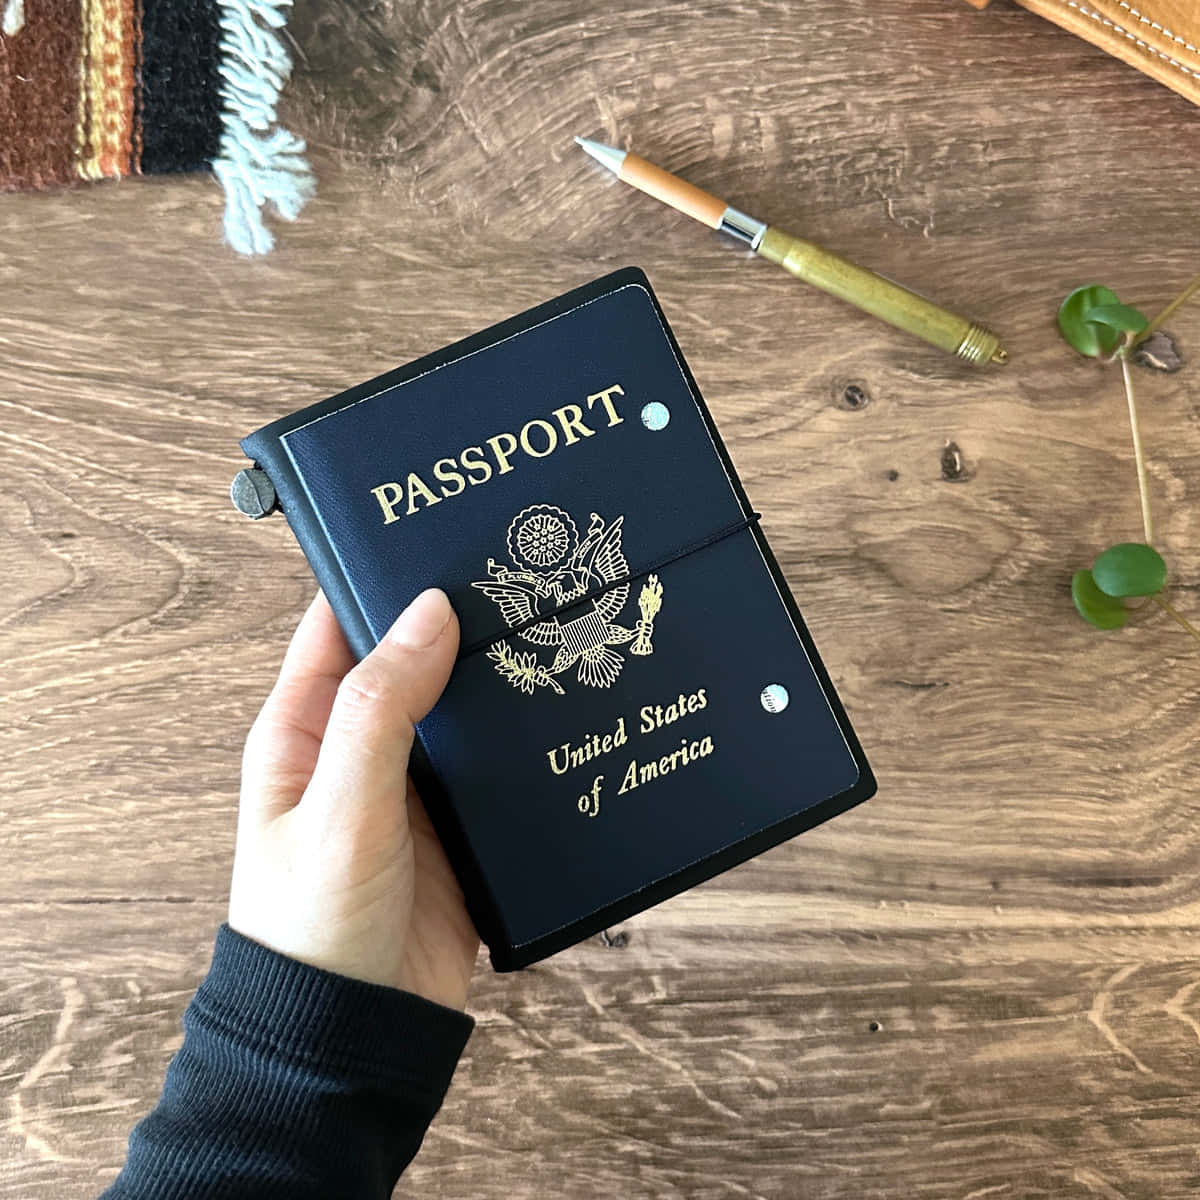 Global Access - A Passport to Explore the World